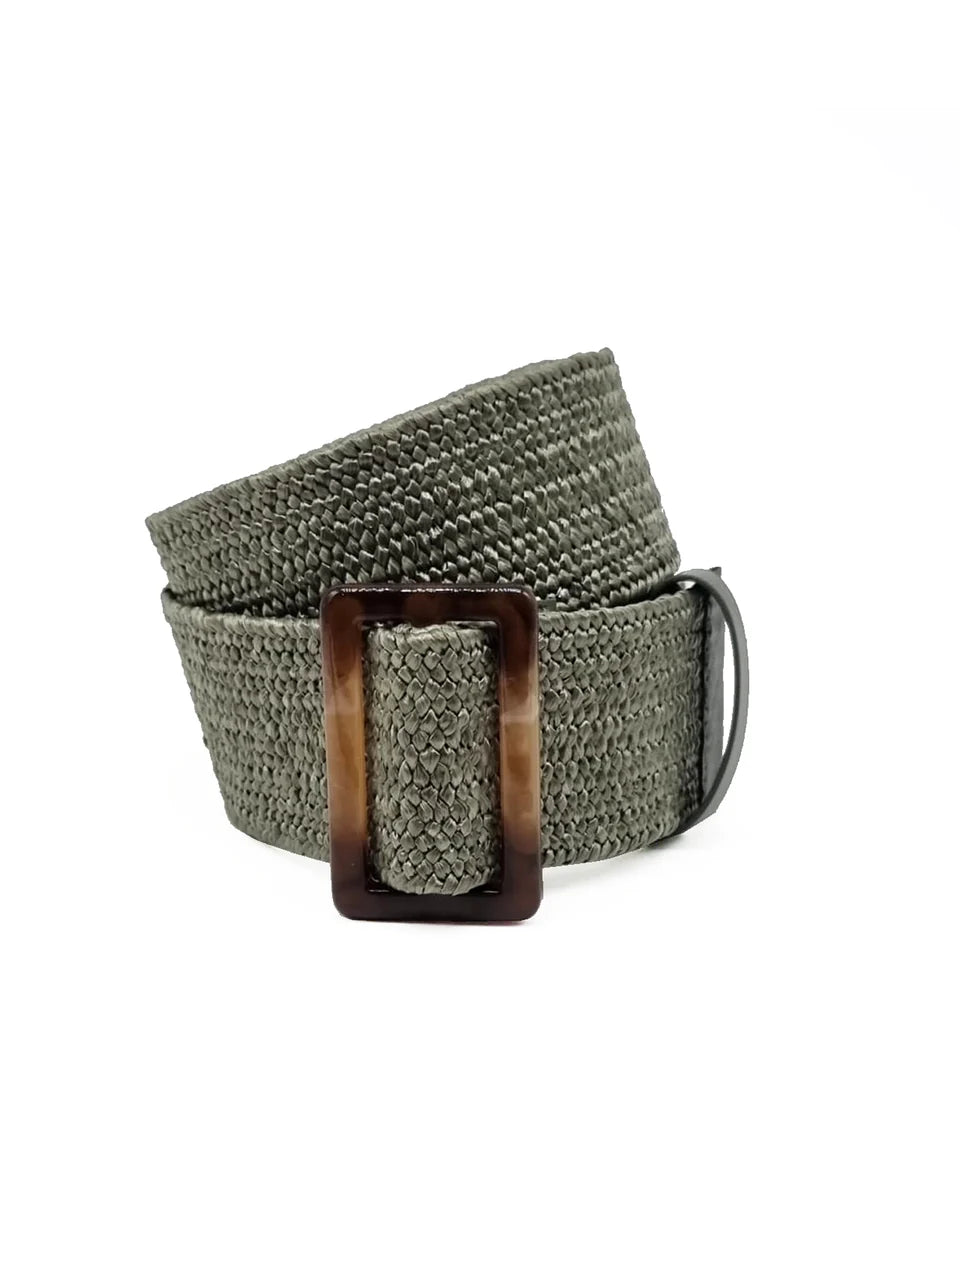 Stretch belt in Khaki with a square buckle